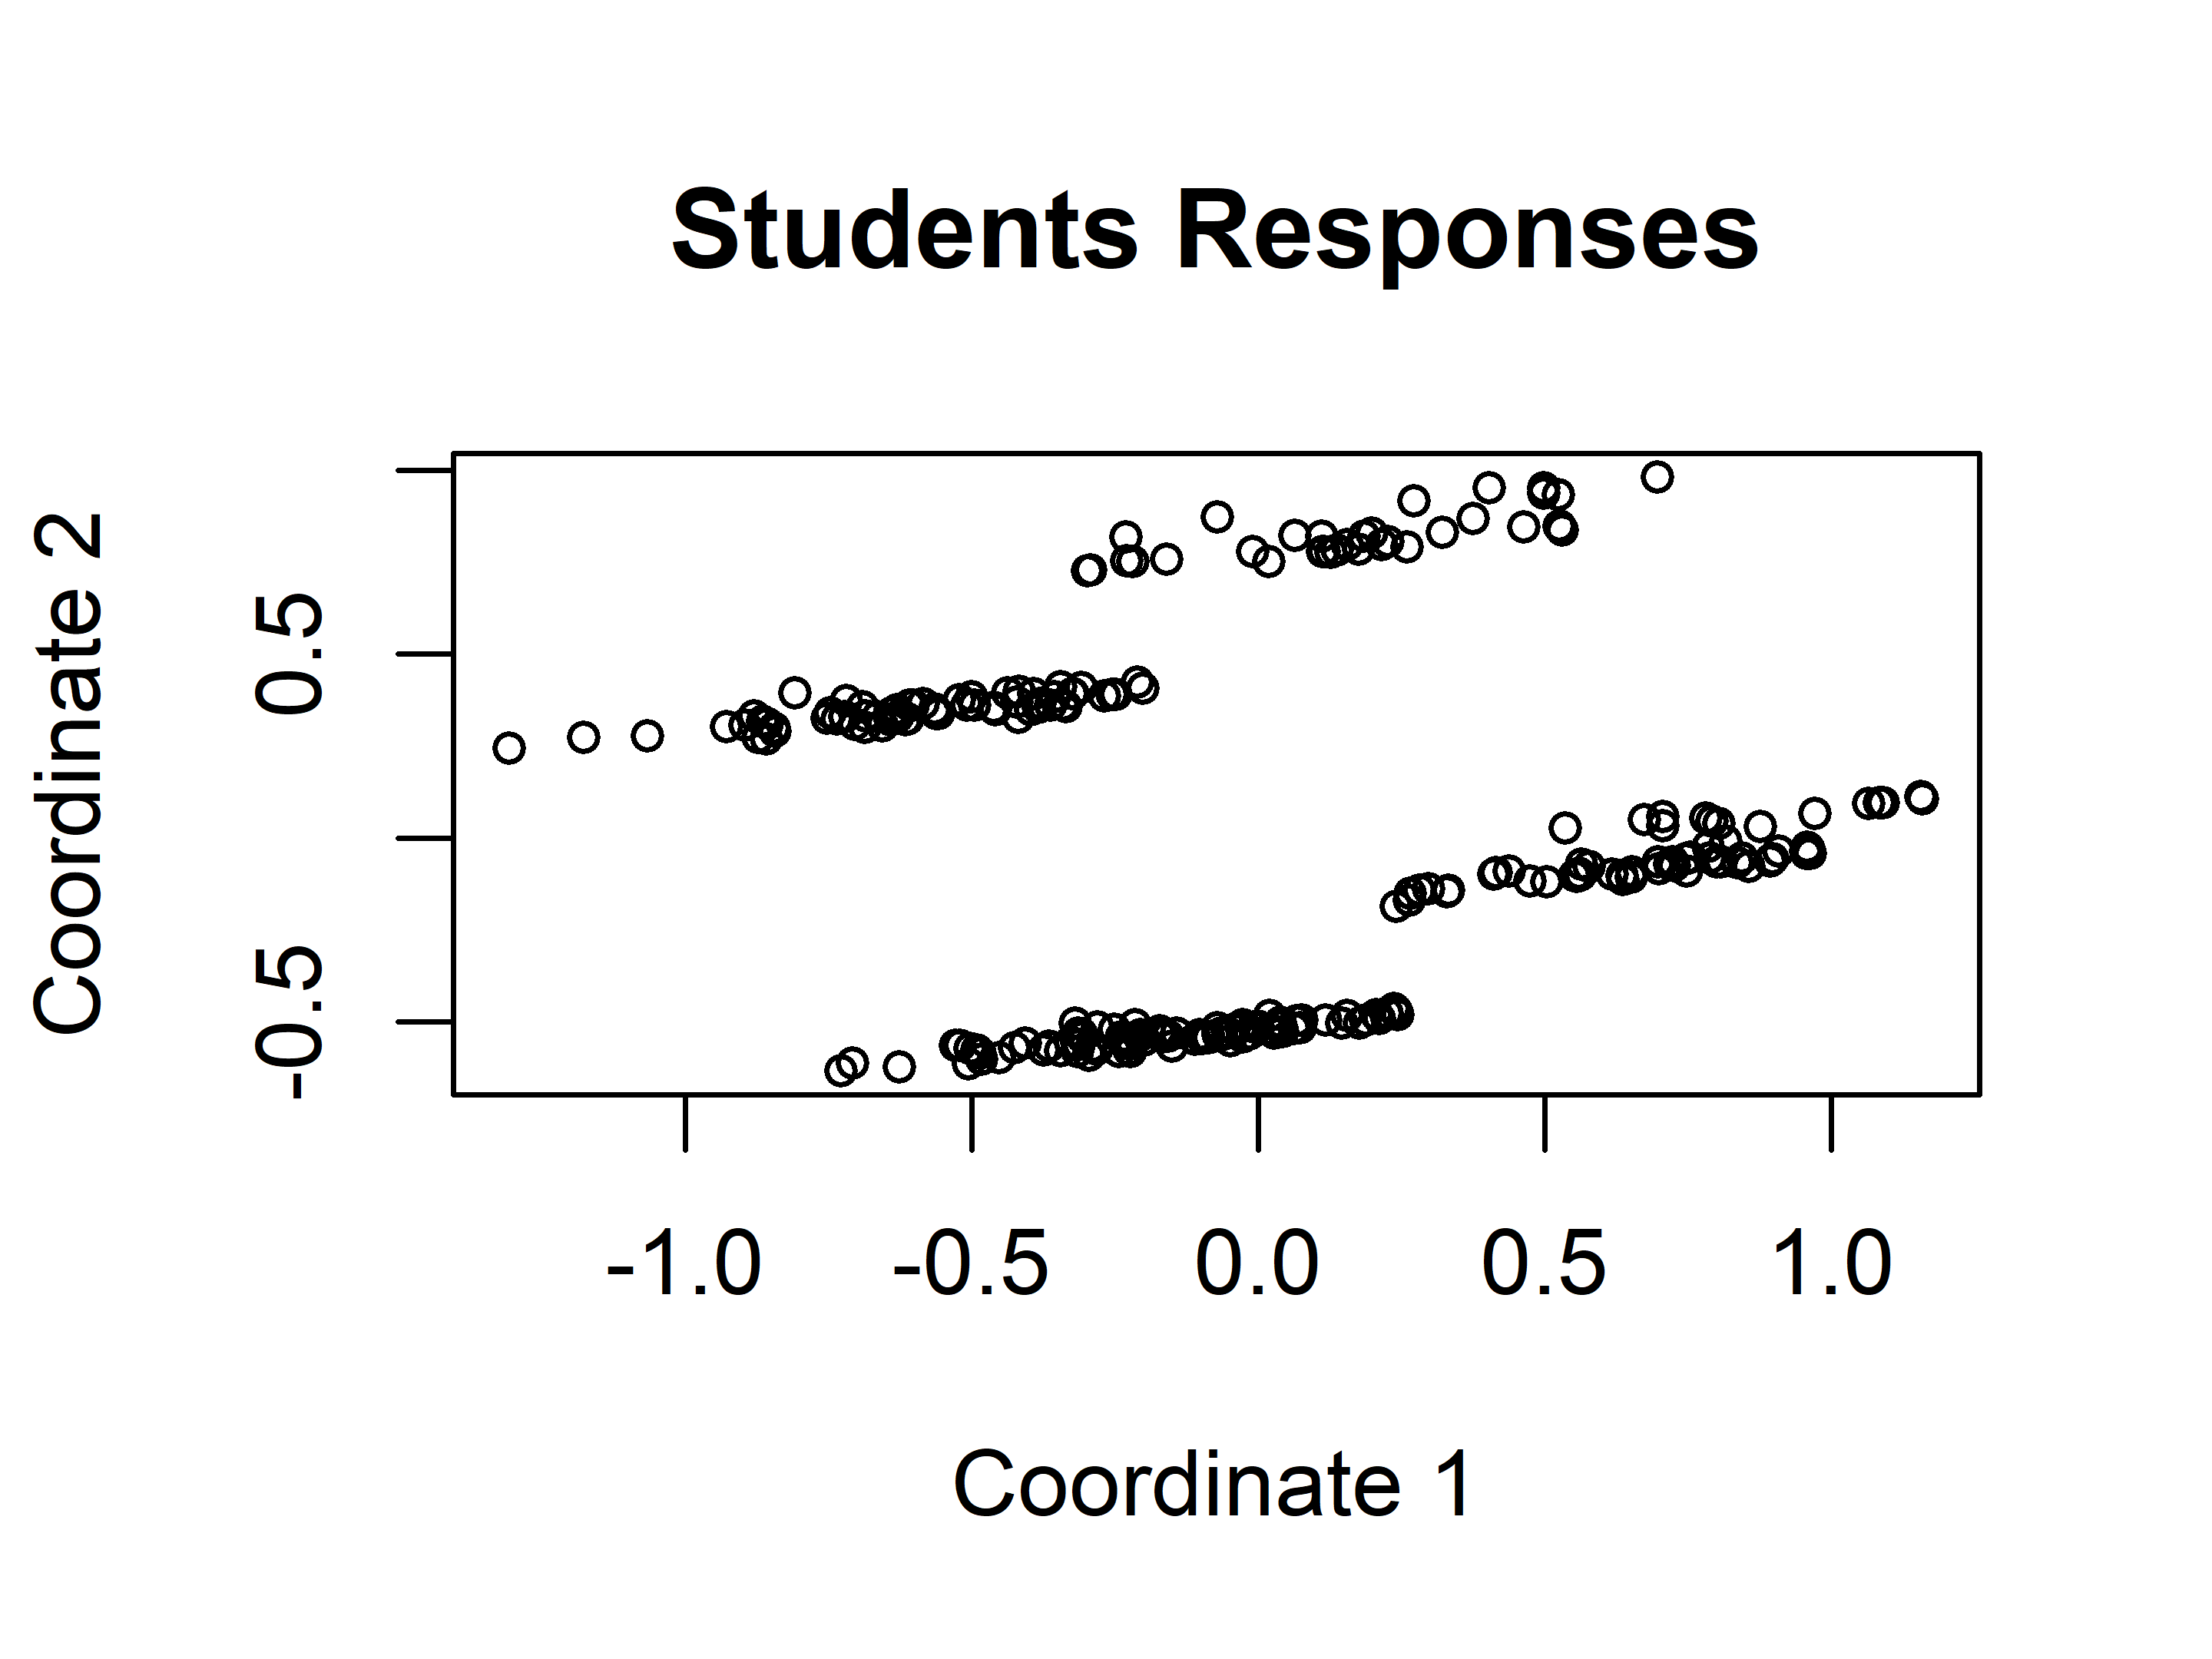 Students responses projected into 2D with MDS.